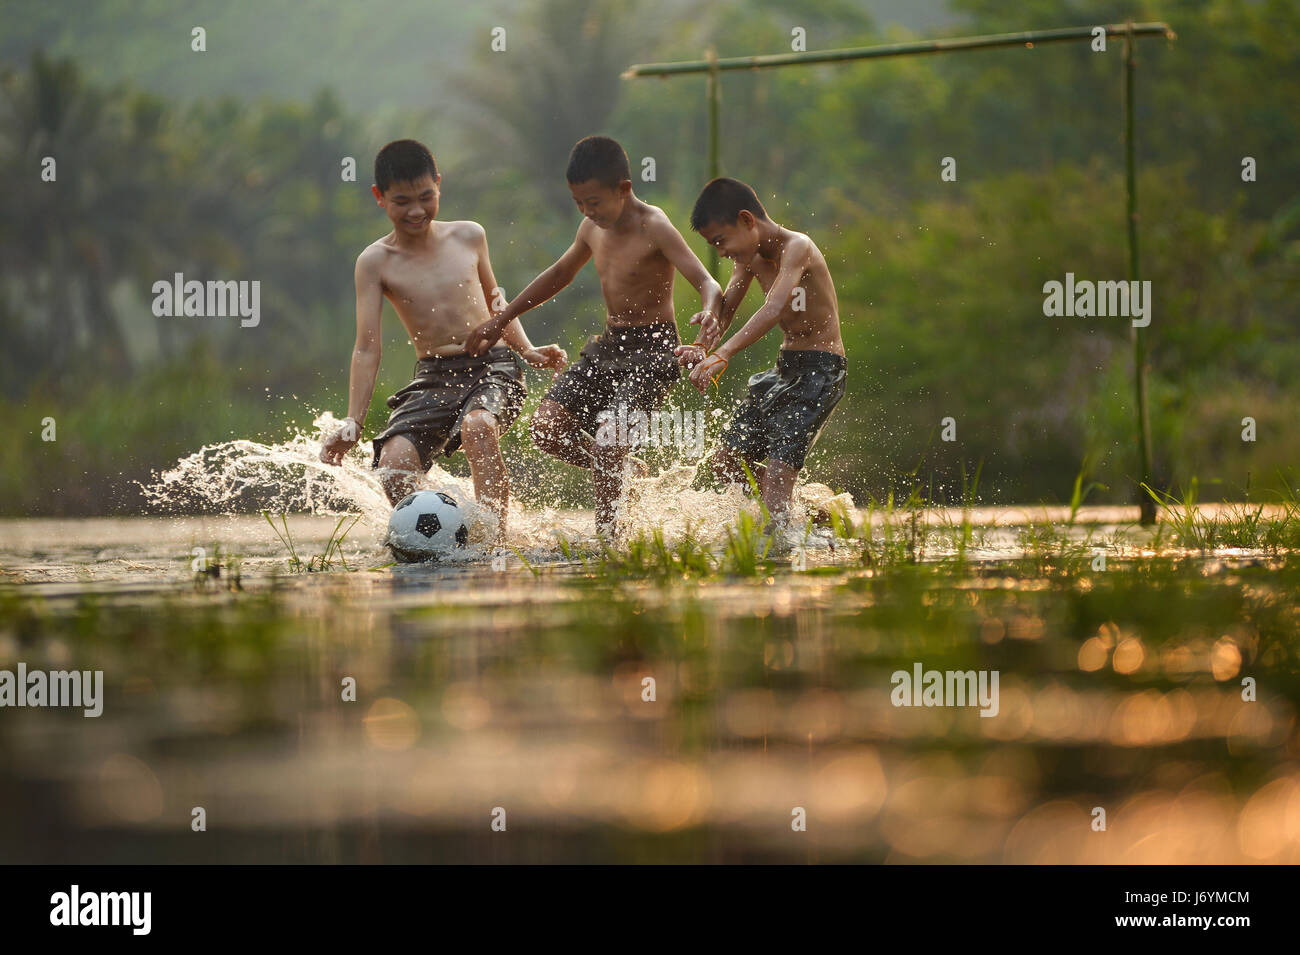 Three boys playing football in a waterlogged field, Thailand Stock Photo